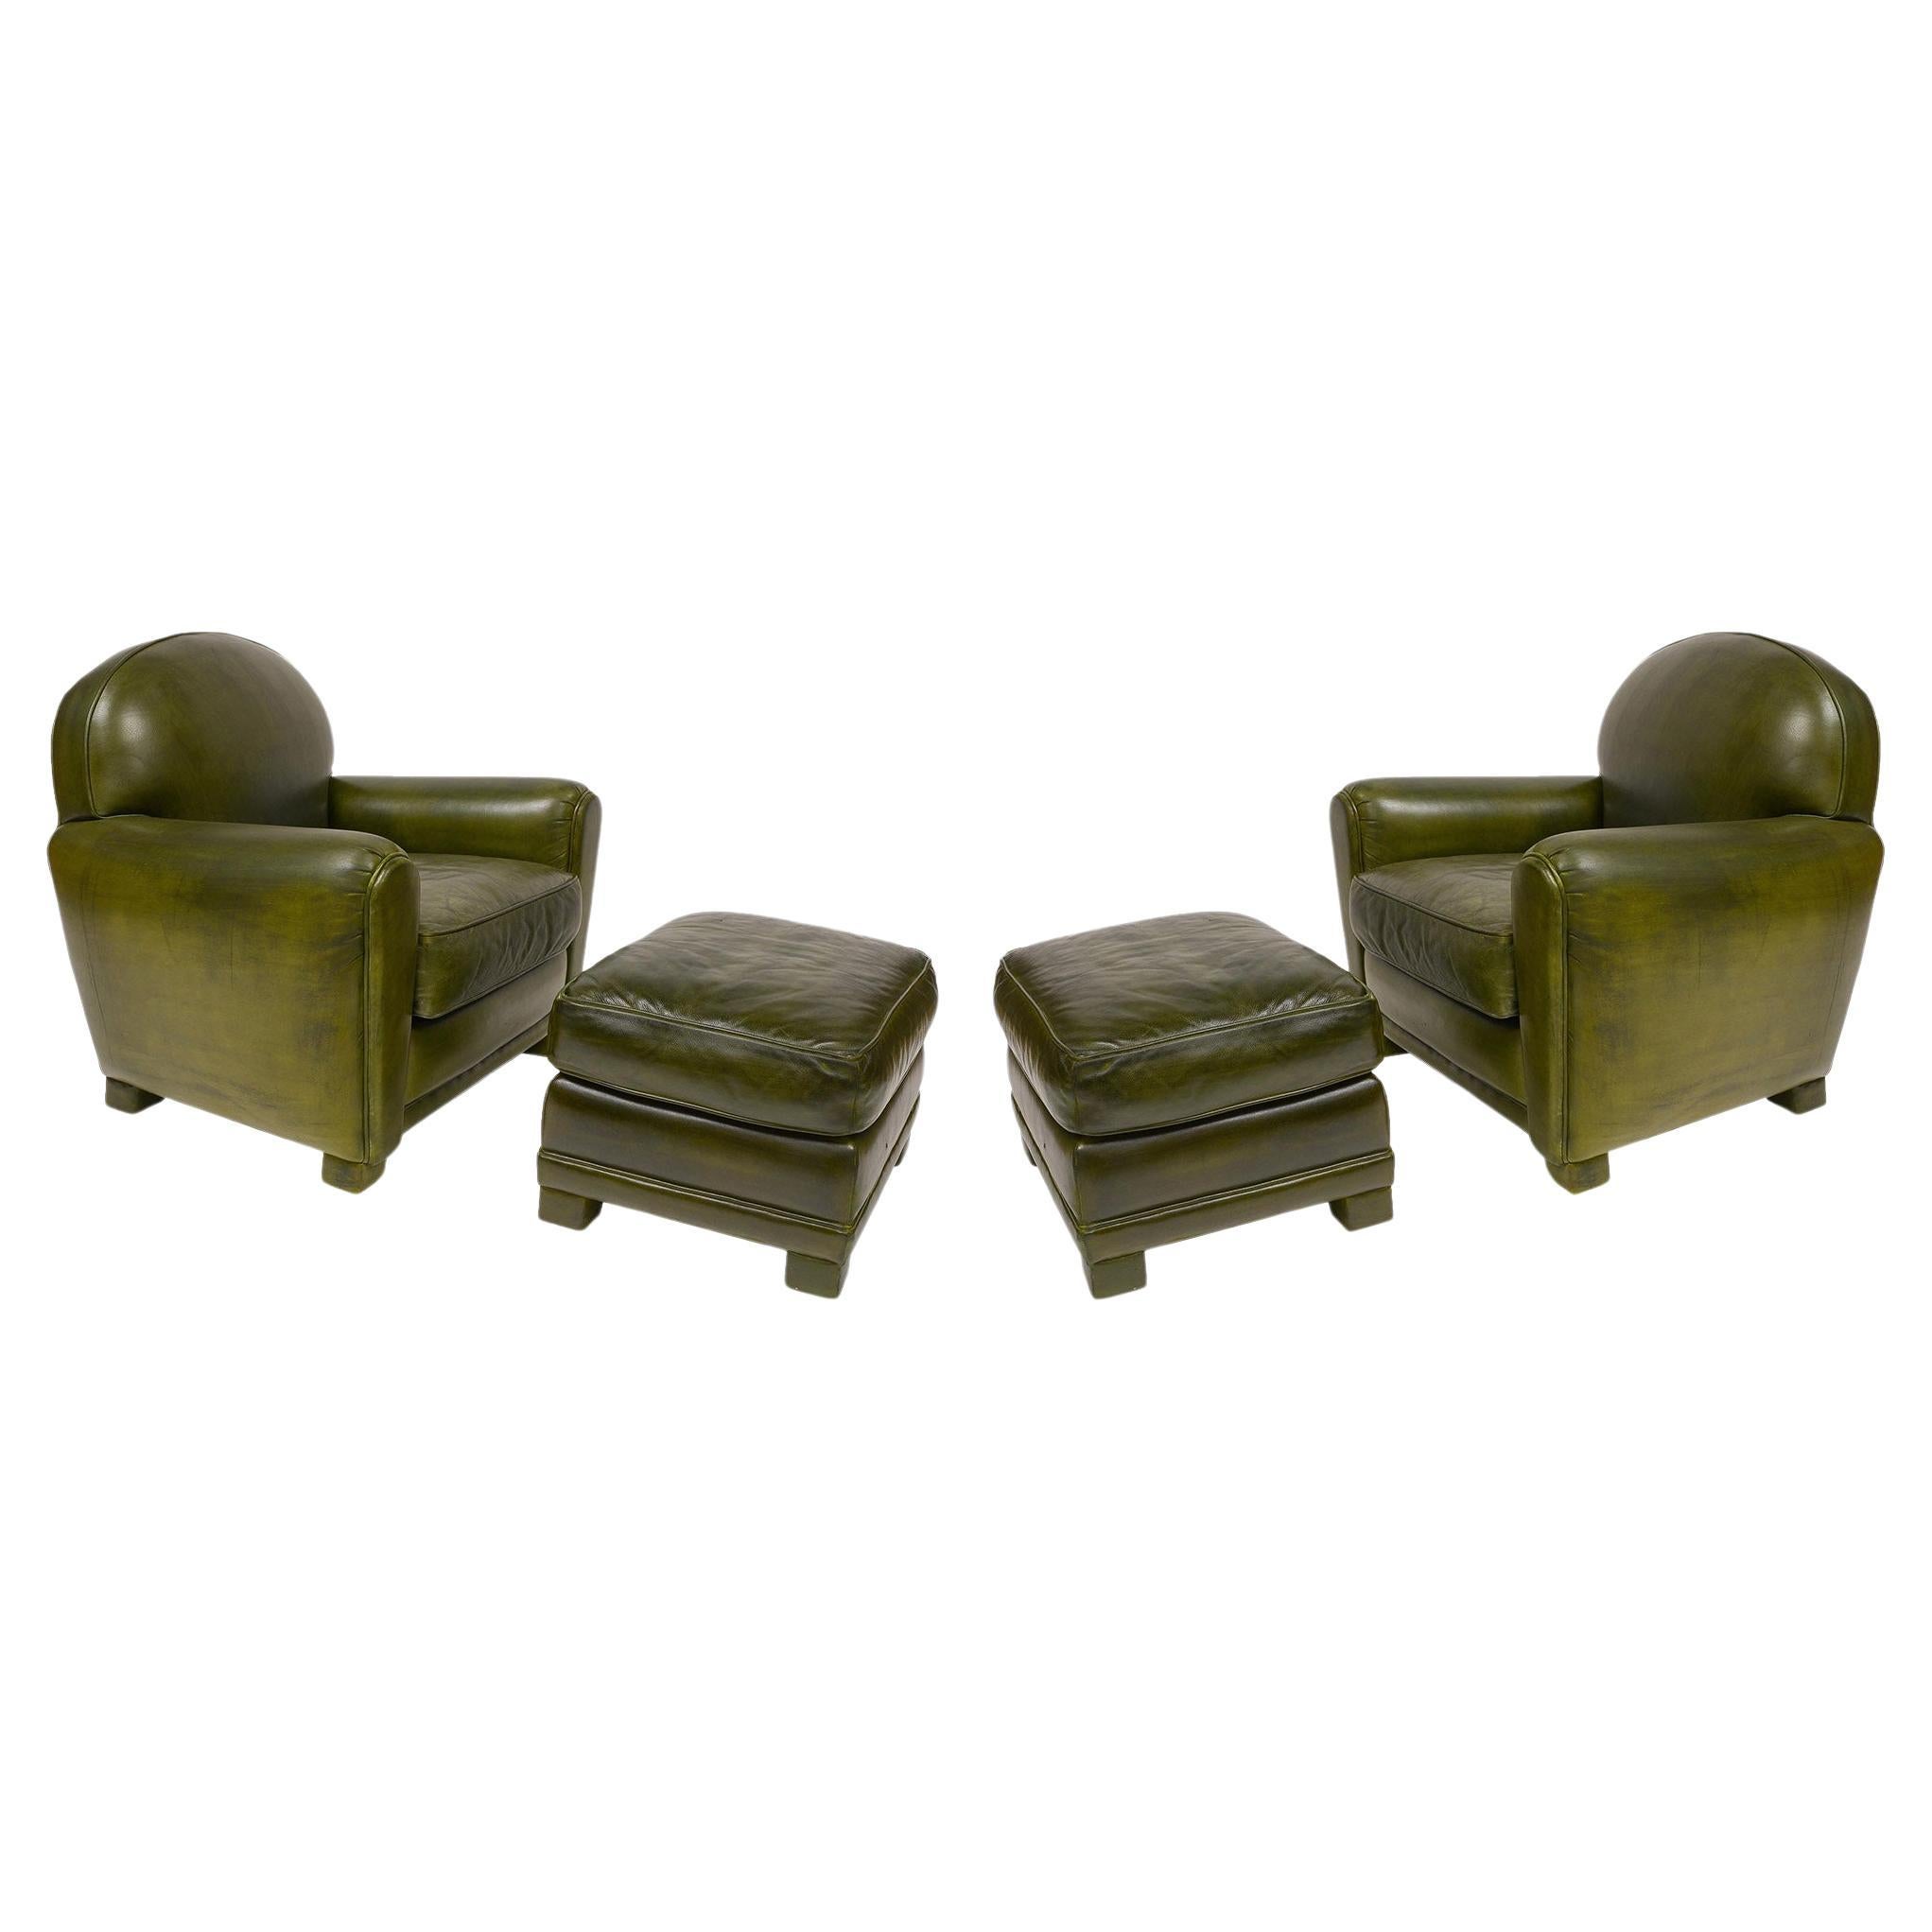 Early 21st Century Green Leather Club Chairs With Ottomans- 4 Pieces